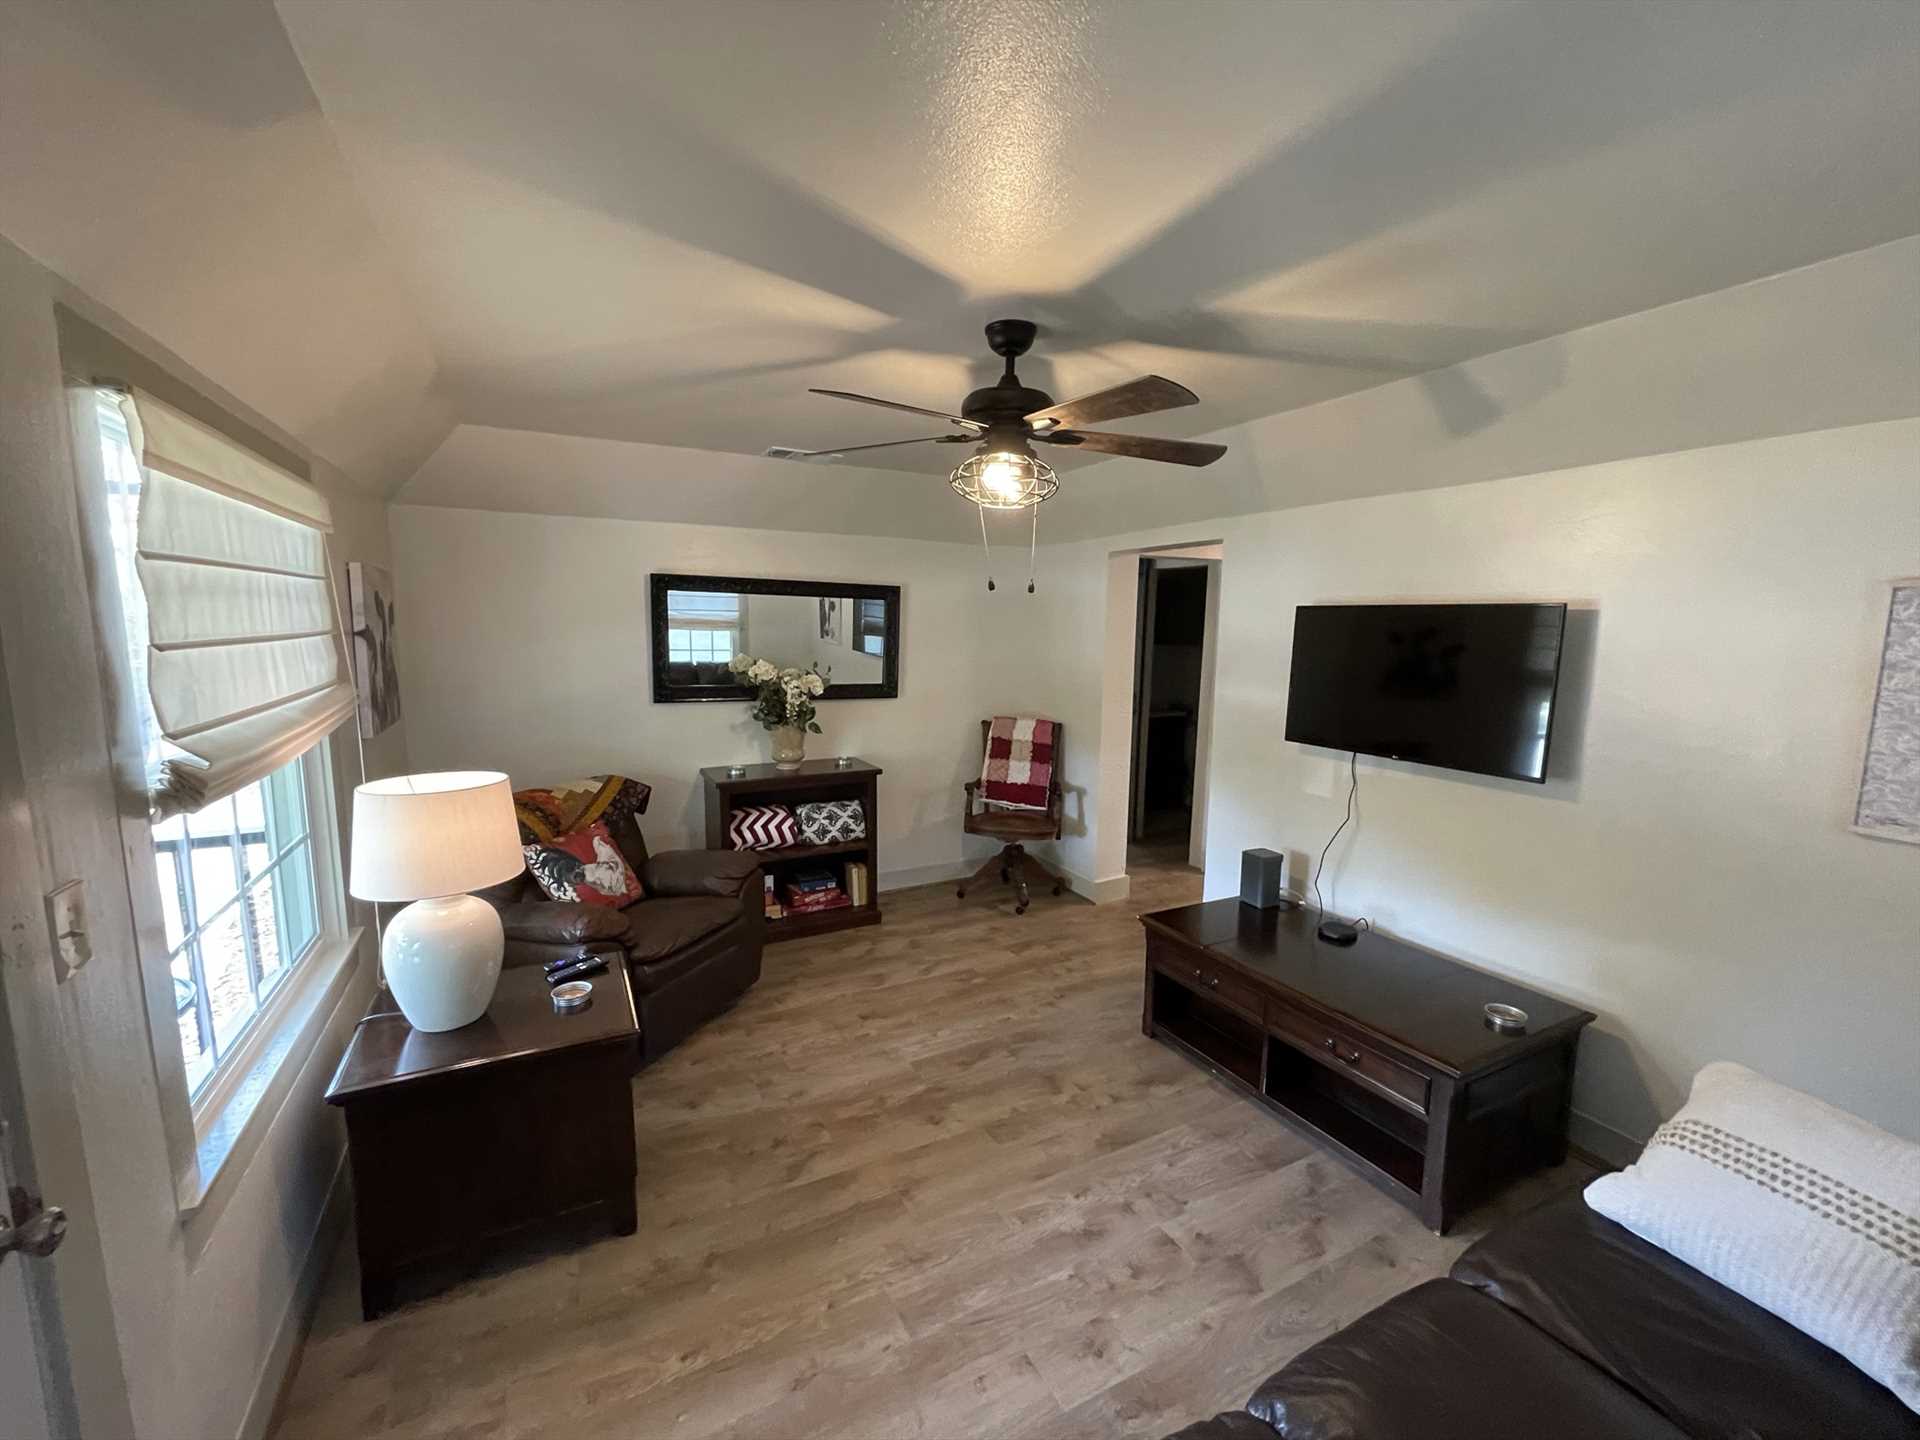                                                 Kick back in comfort in the roomy living area! The Star is comfy 24/7/365 with central air and heat, and several ceiling fans, too.